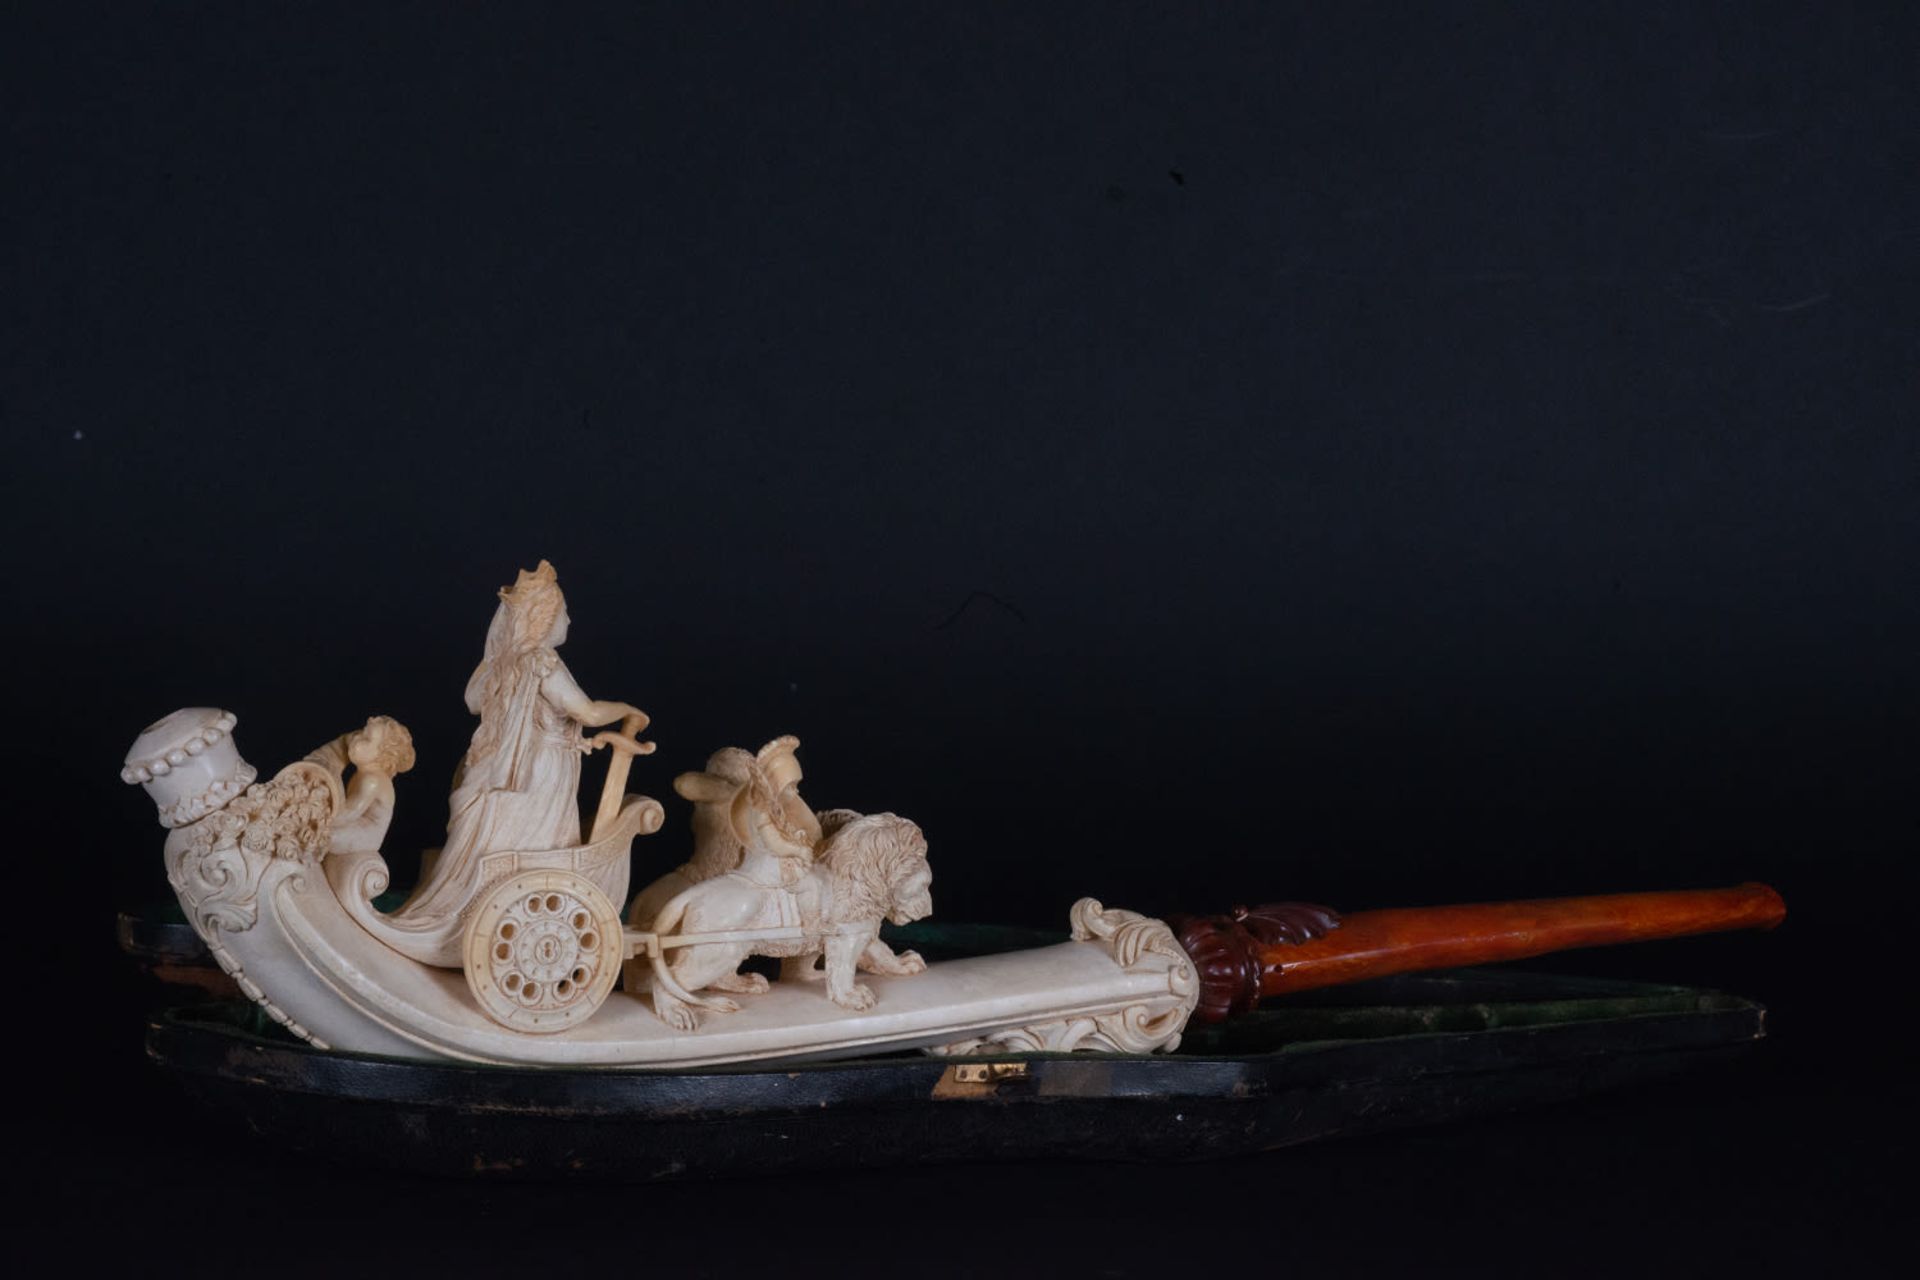 Rare and Exceptional Sea Foam Pipe and Amber Representing the Goddess Cibeles, 19th century - Image 2 of 15